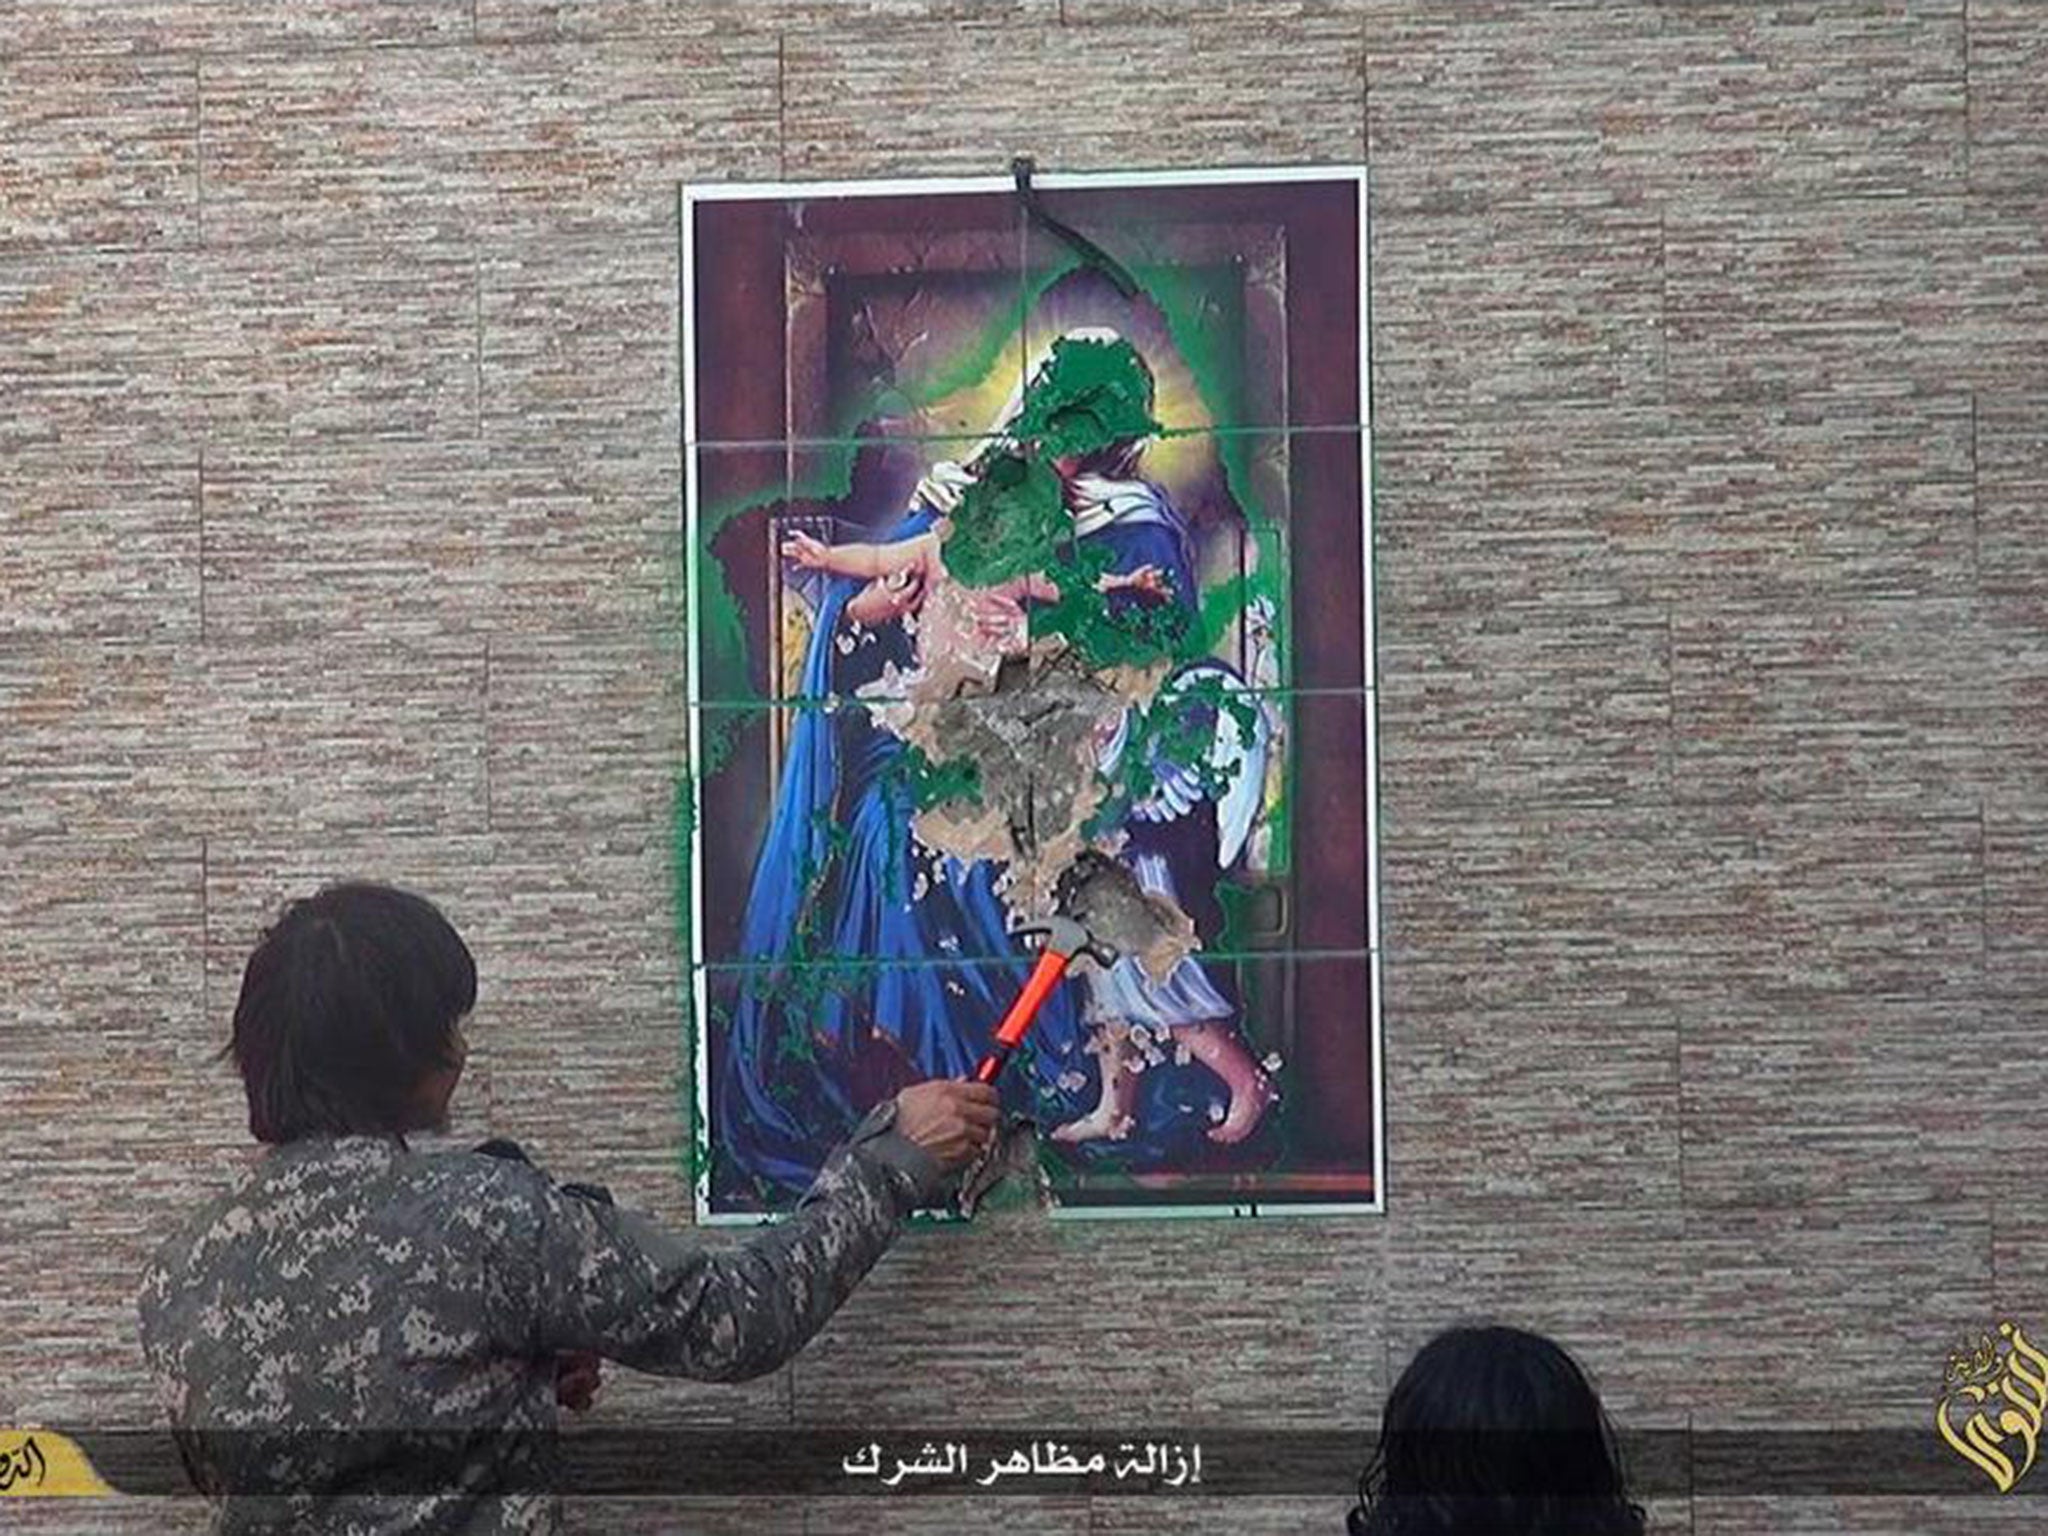 A militant destroys a statue of the Virgin Mary and baby Jesus